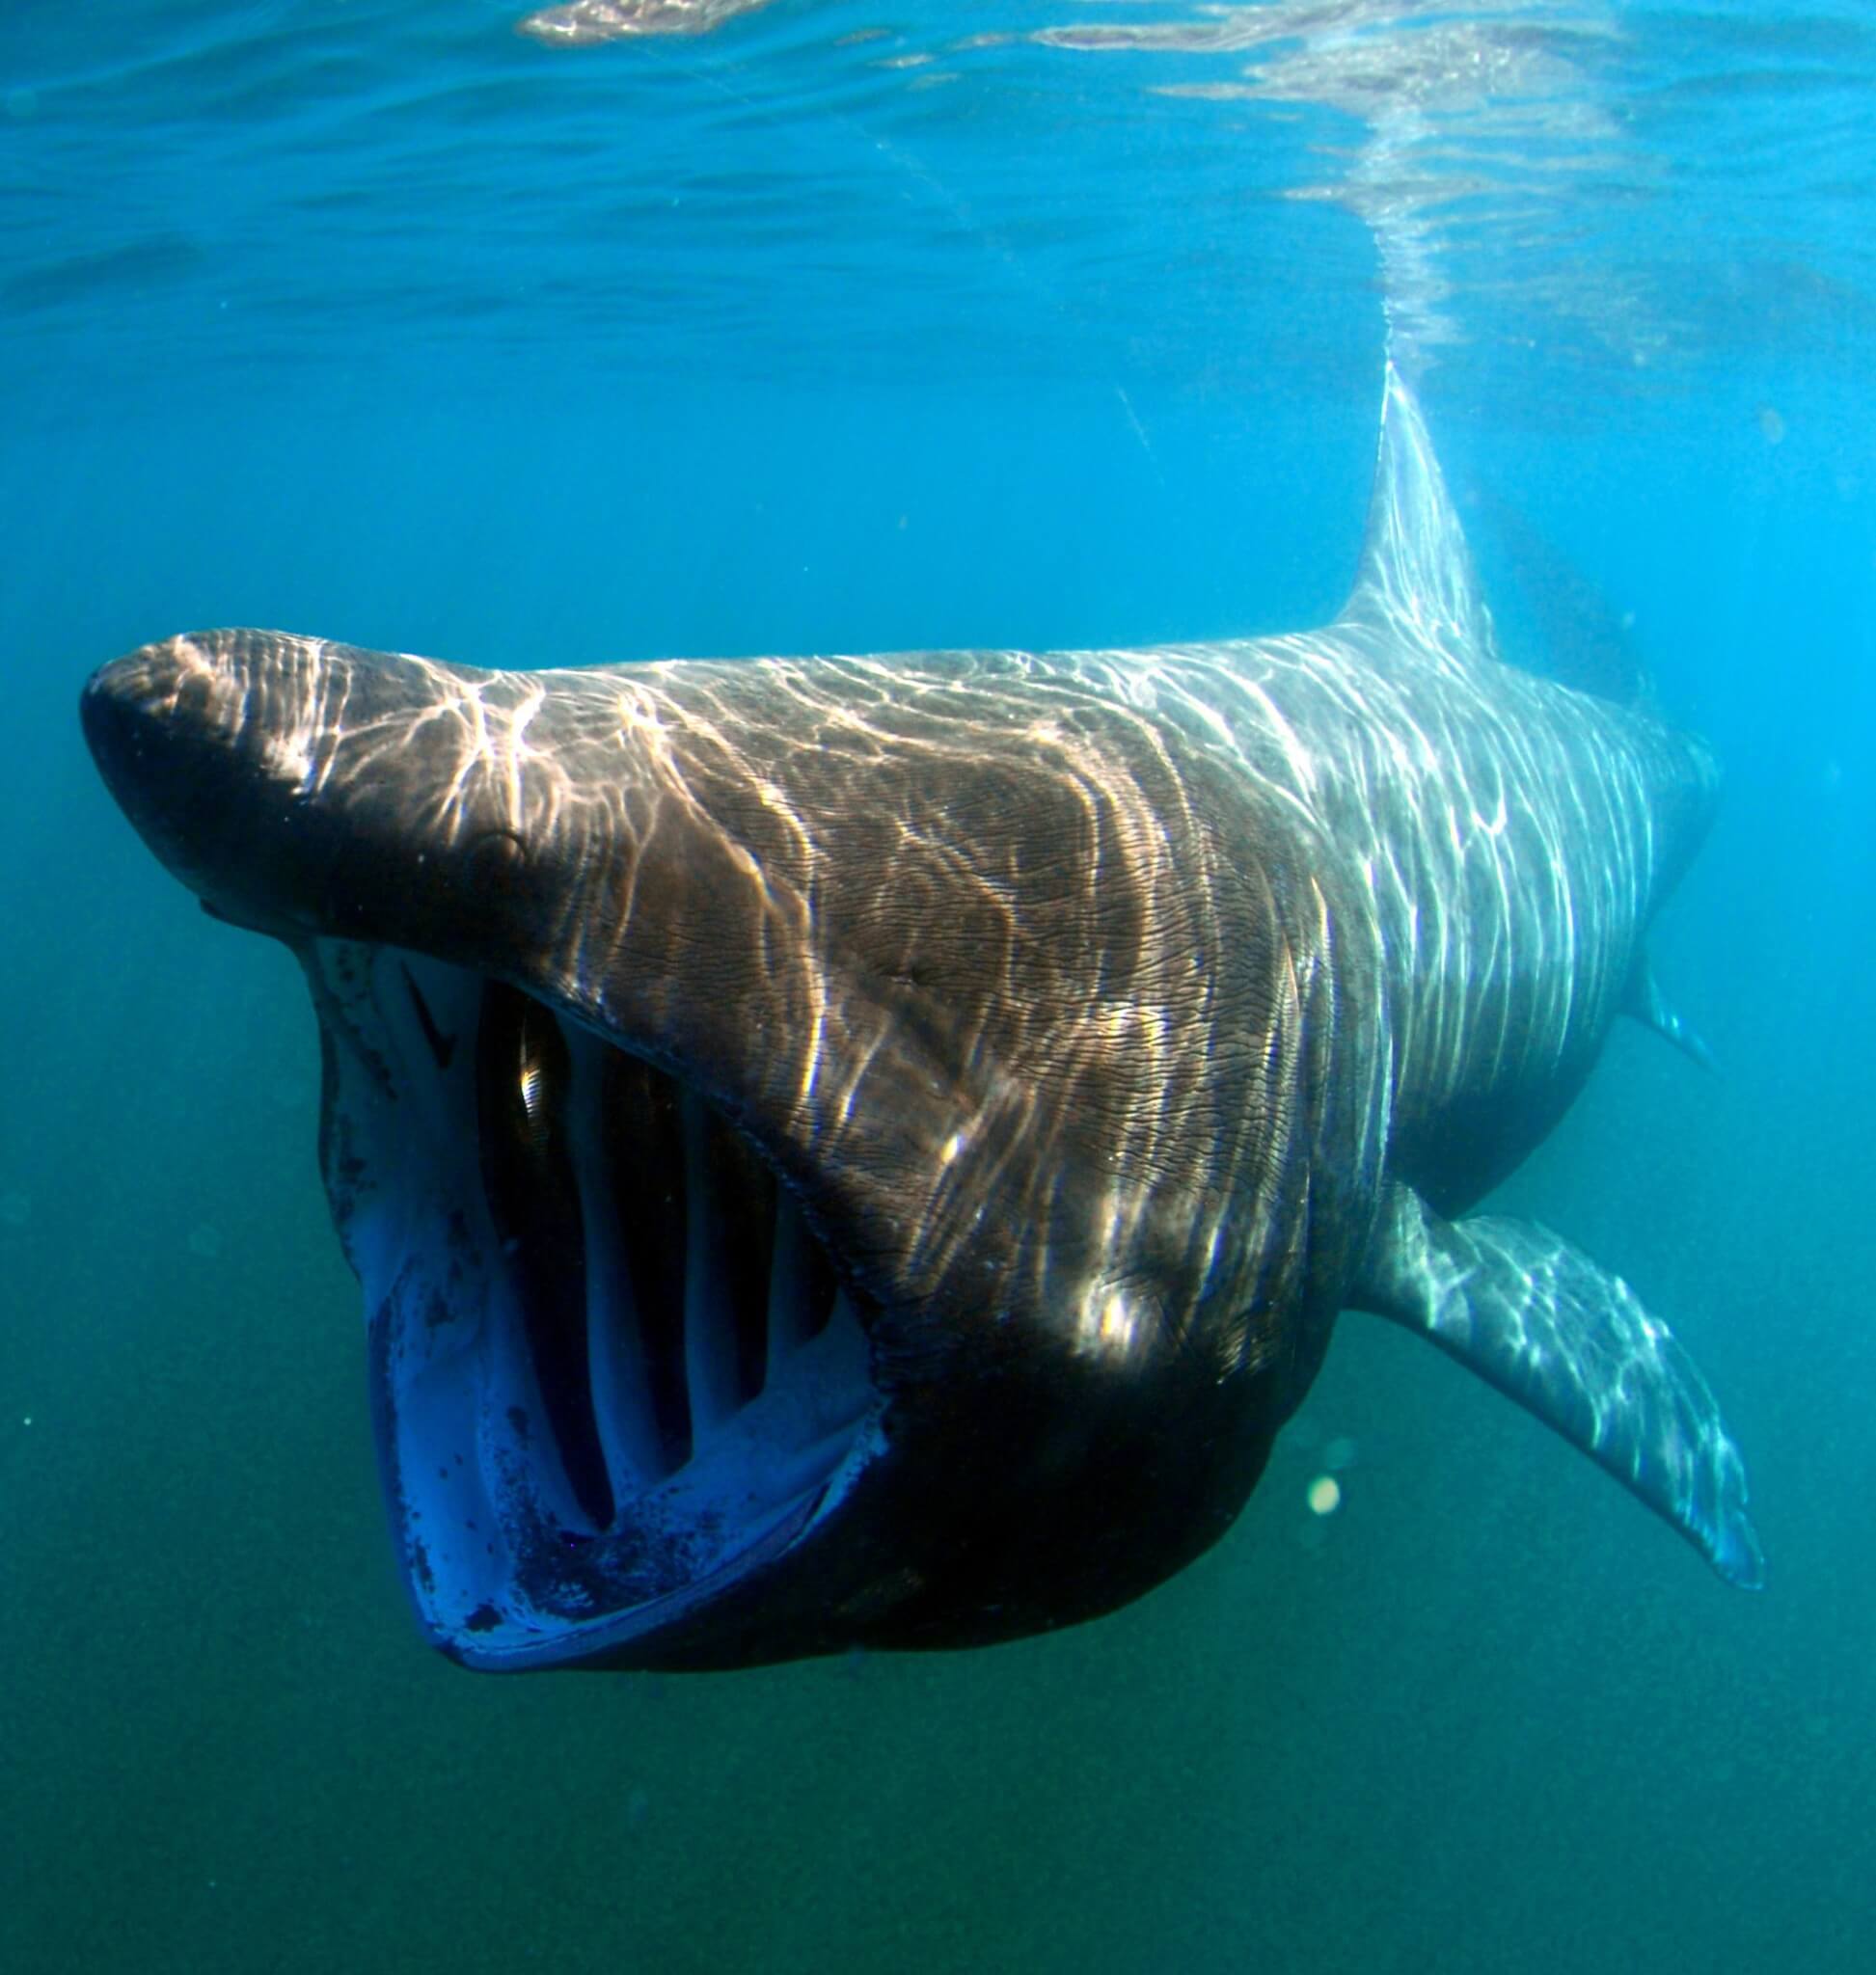 Close-up view of a basking shark.